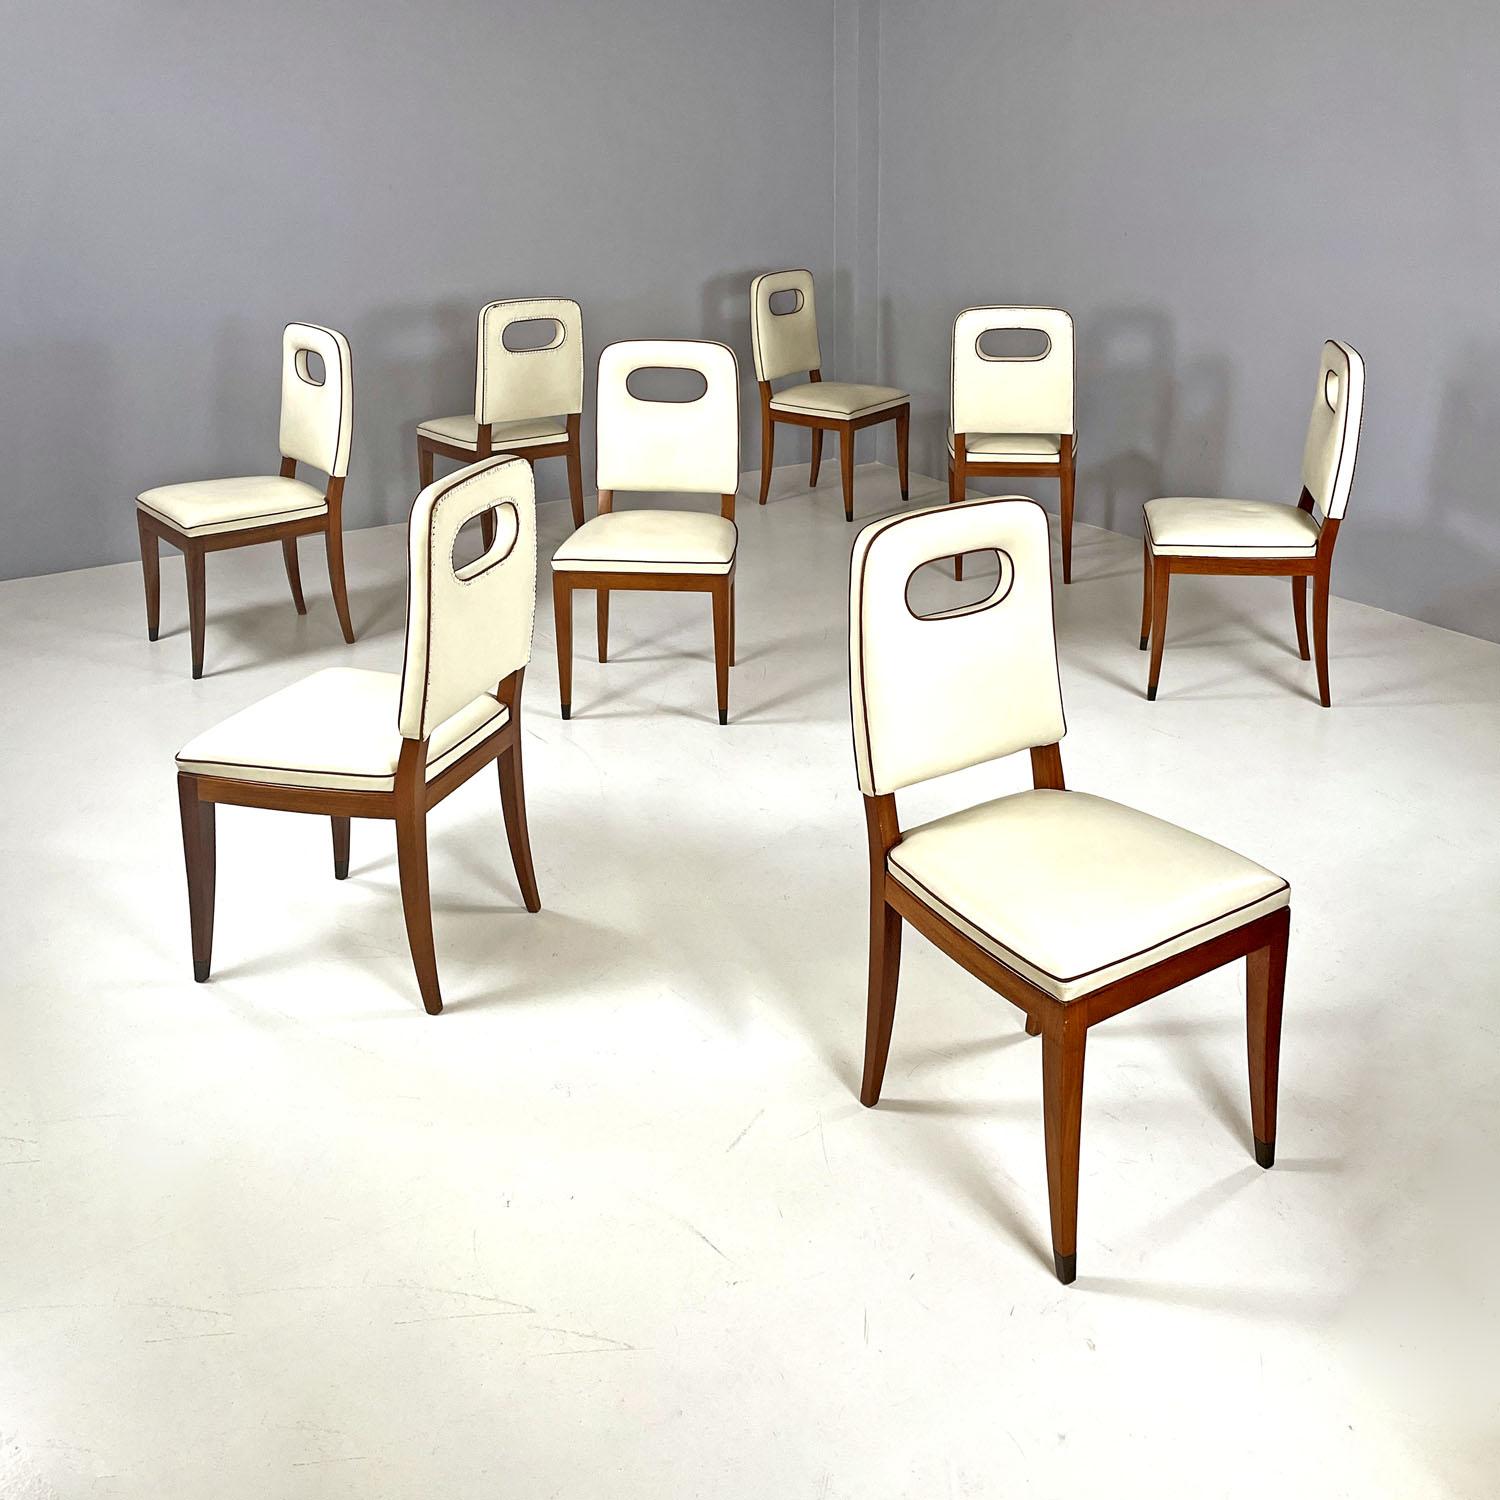 Italian Art Deco white leather and wood chairs by Giovanni Gariboldi, 1940s
set of eight chairs with rectangular seat with wooden structure. The seat and back are padded and covered in white leather with brown leather profiles, fixed to the